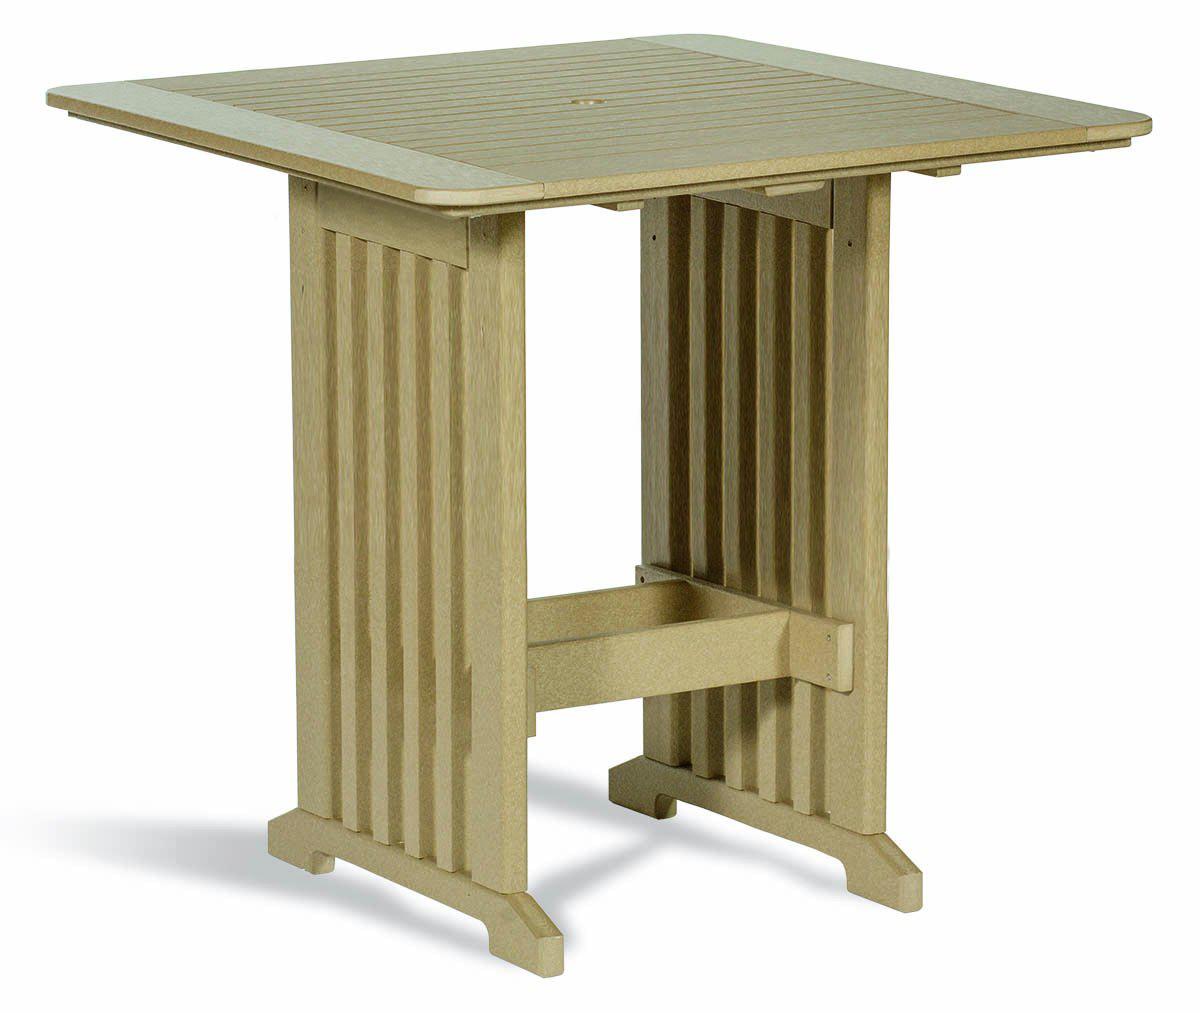 Leisure Lawns Amish Made Recycled Plastic 43" Square Table (Bar Height) Model #843B - LEAD TIME TO SHIP 4 WEEKS OR LESS